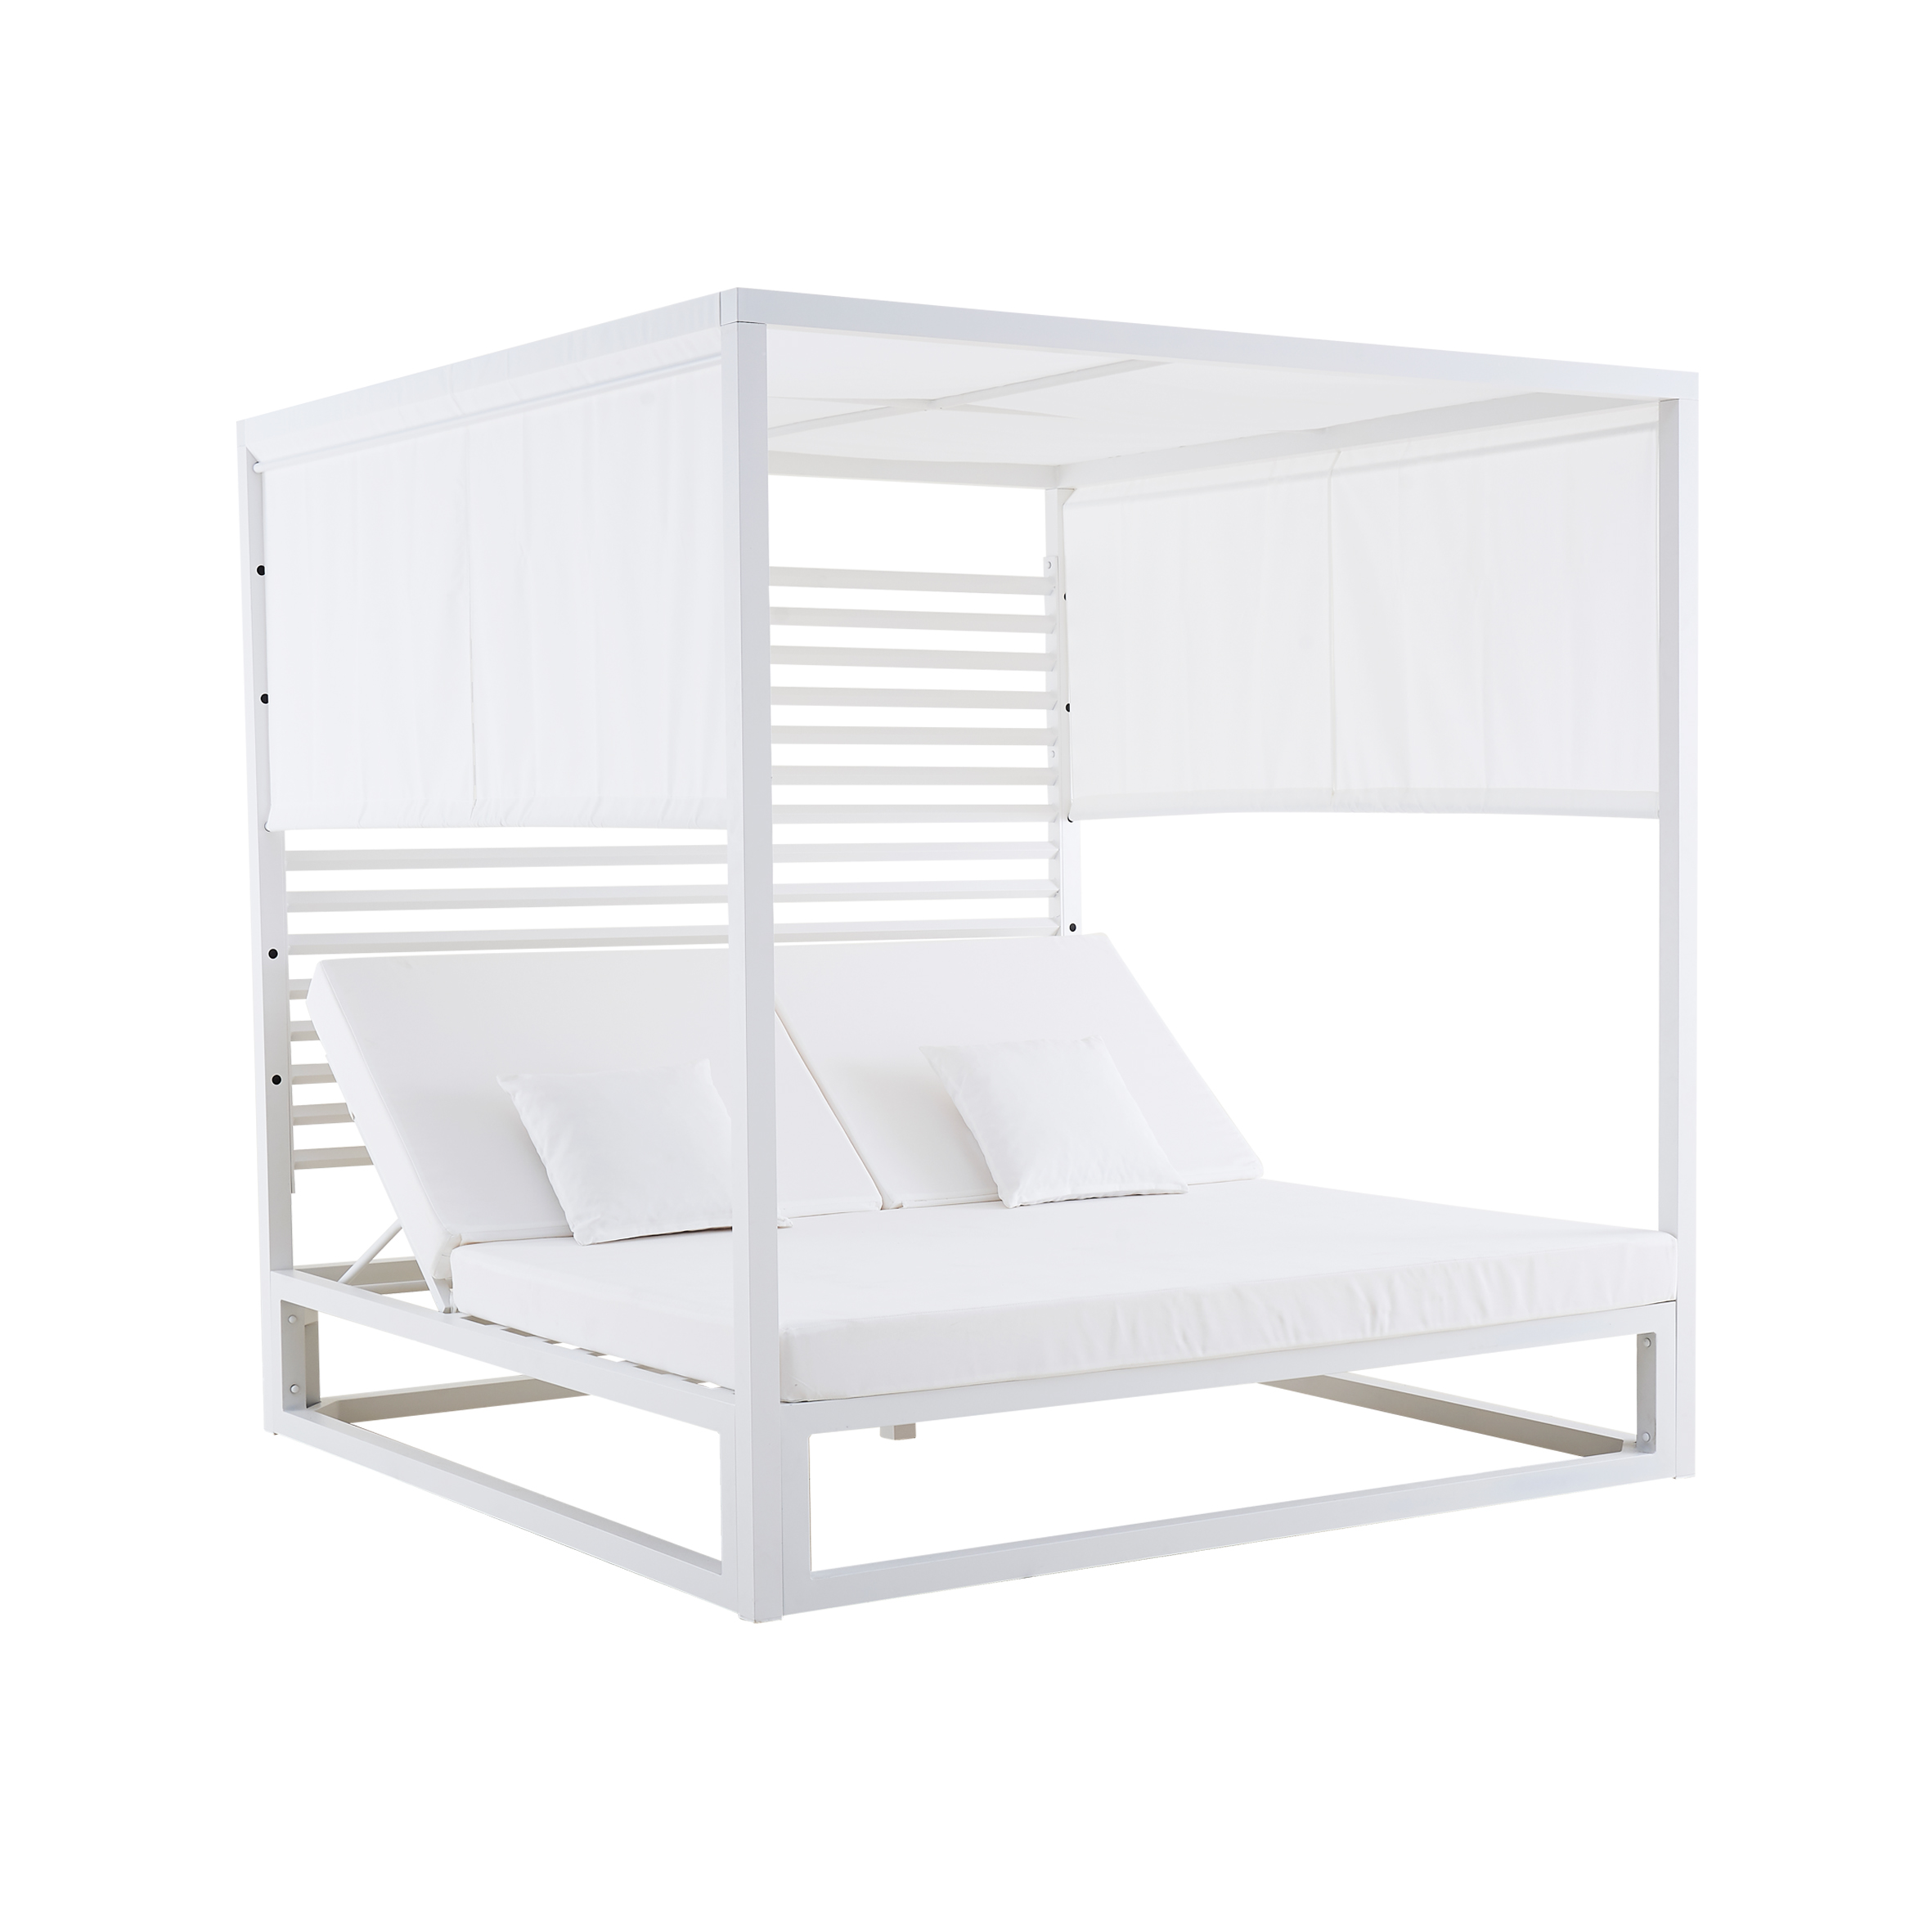 Rain daybed with panel S1